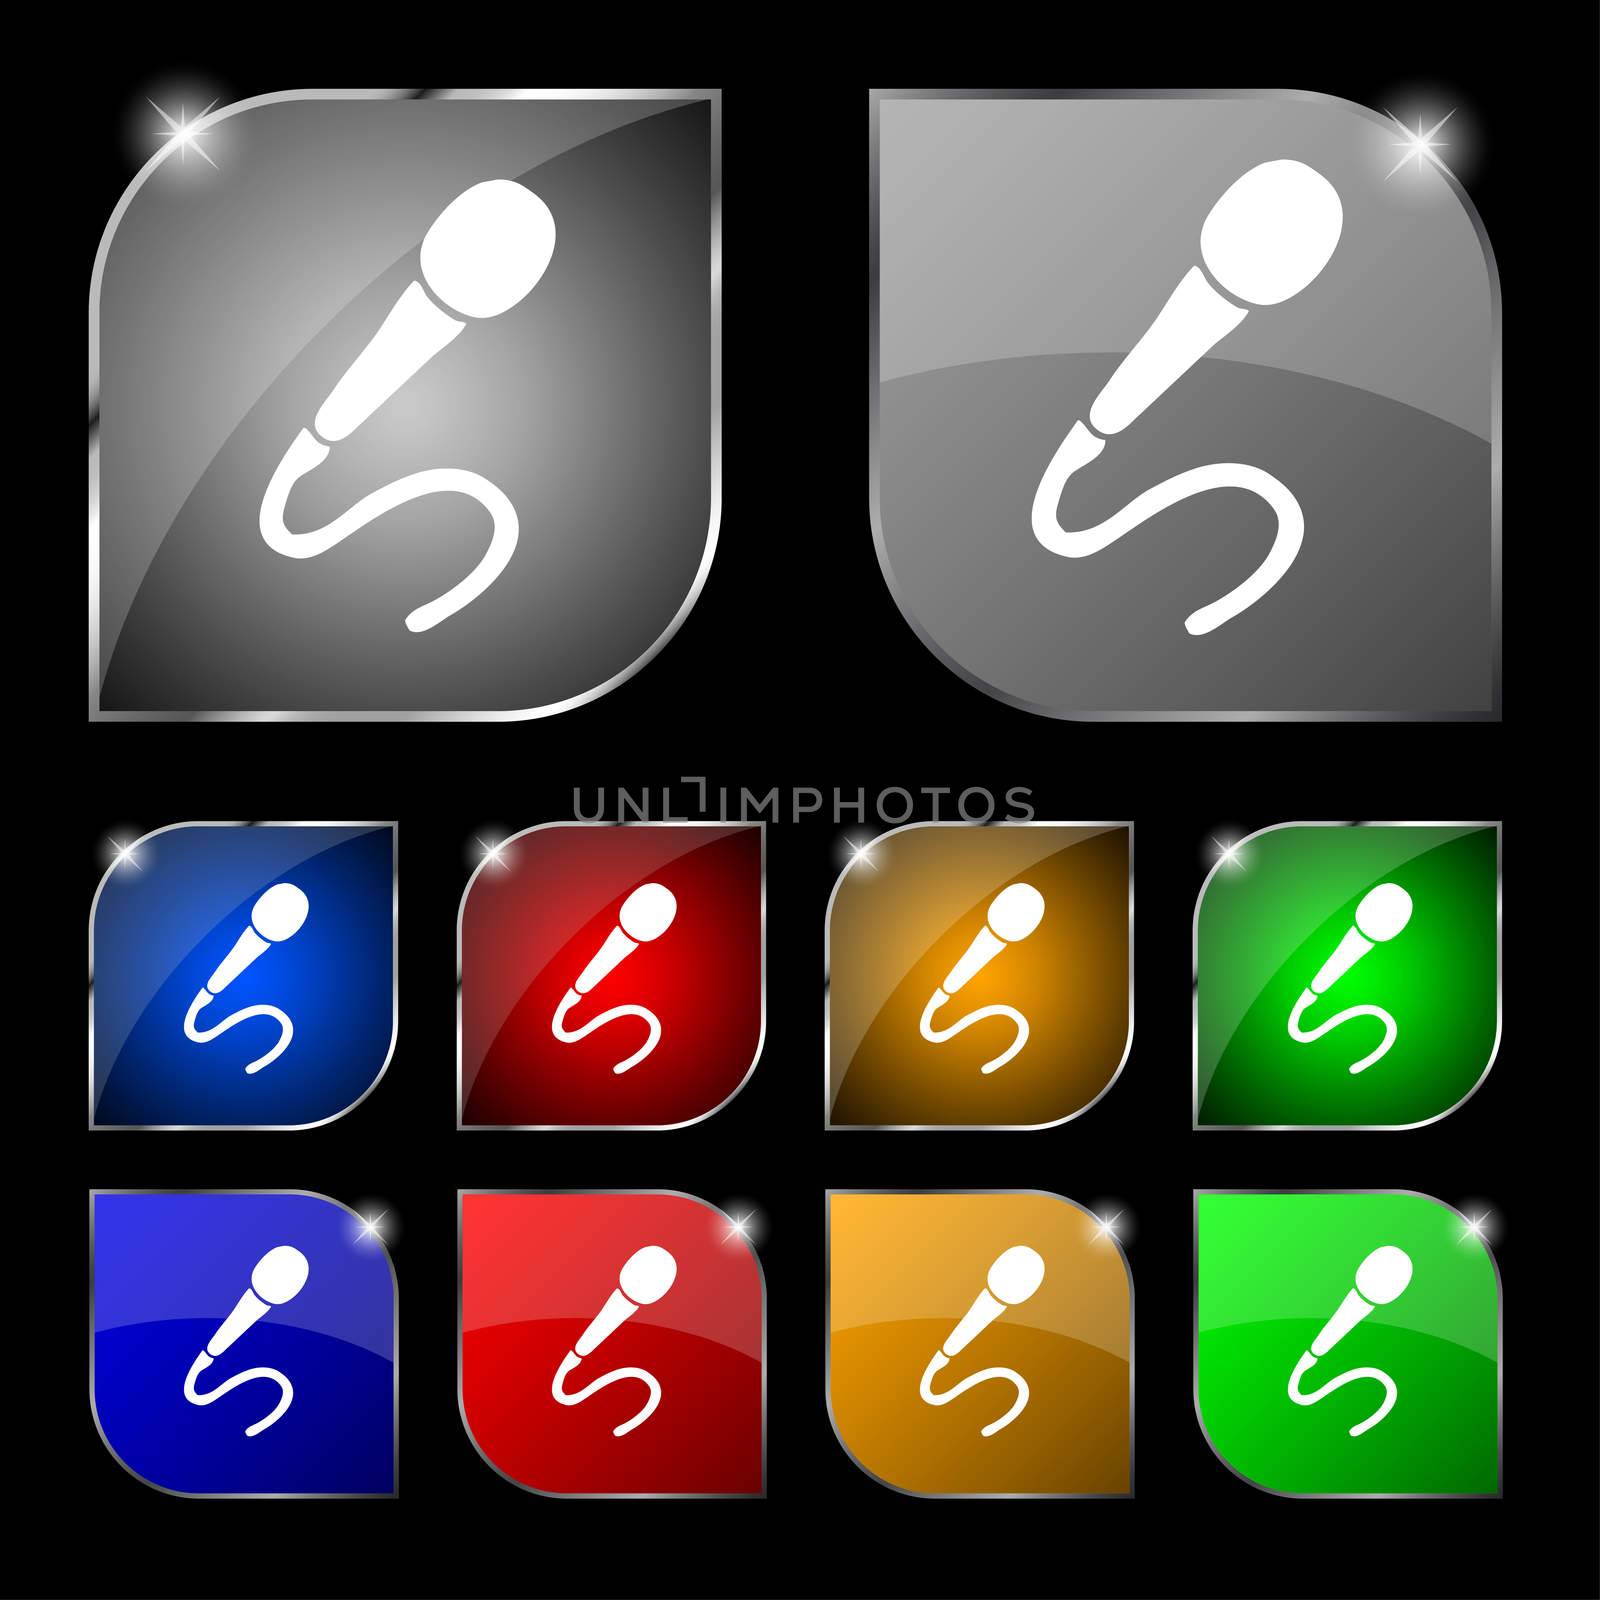 microphone icon sign. Set of ten colorful buttons with glare. illustration